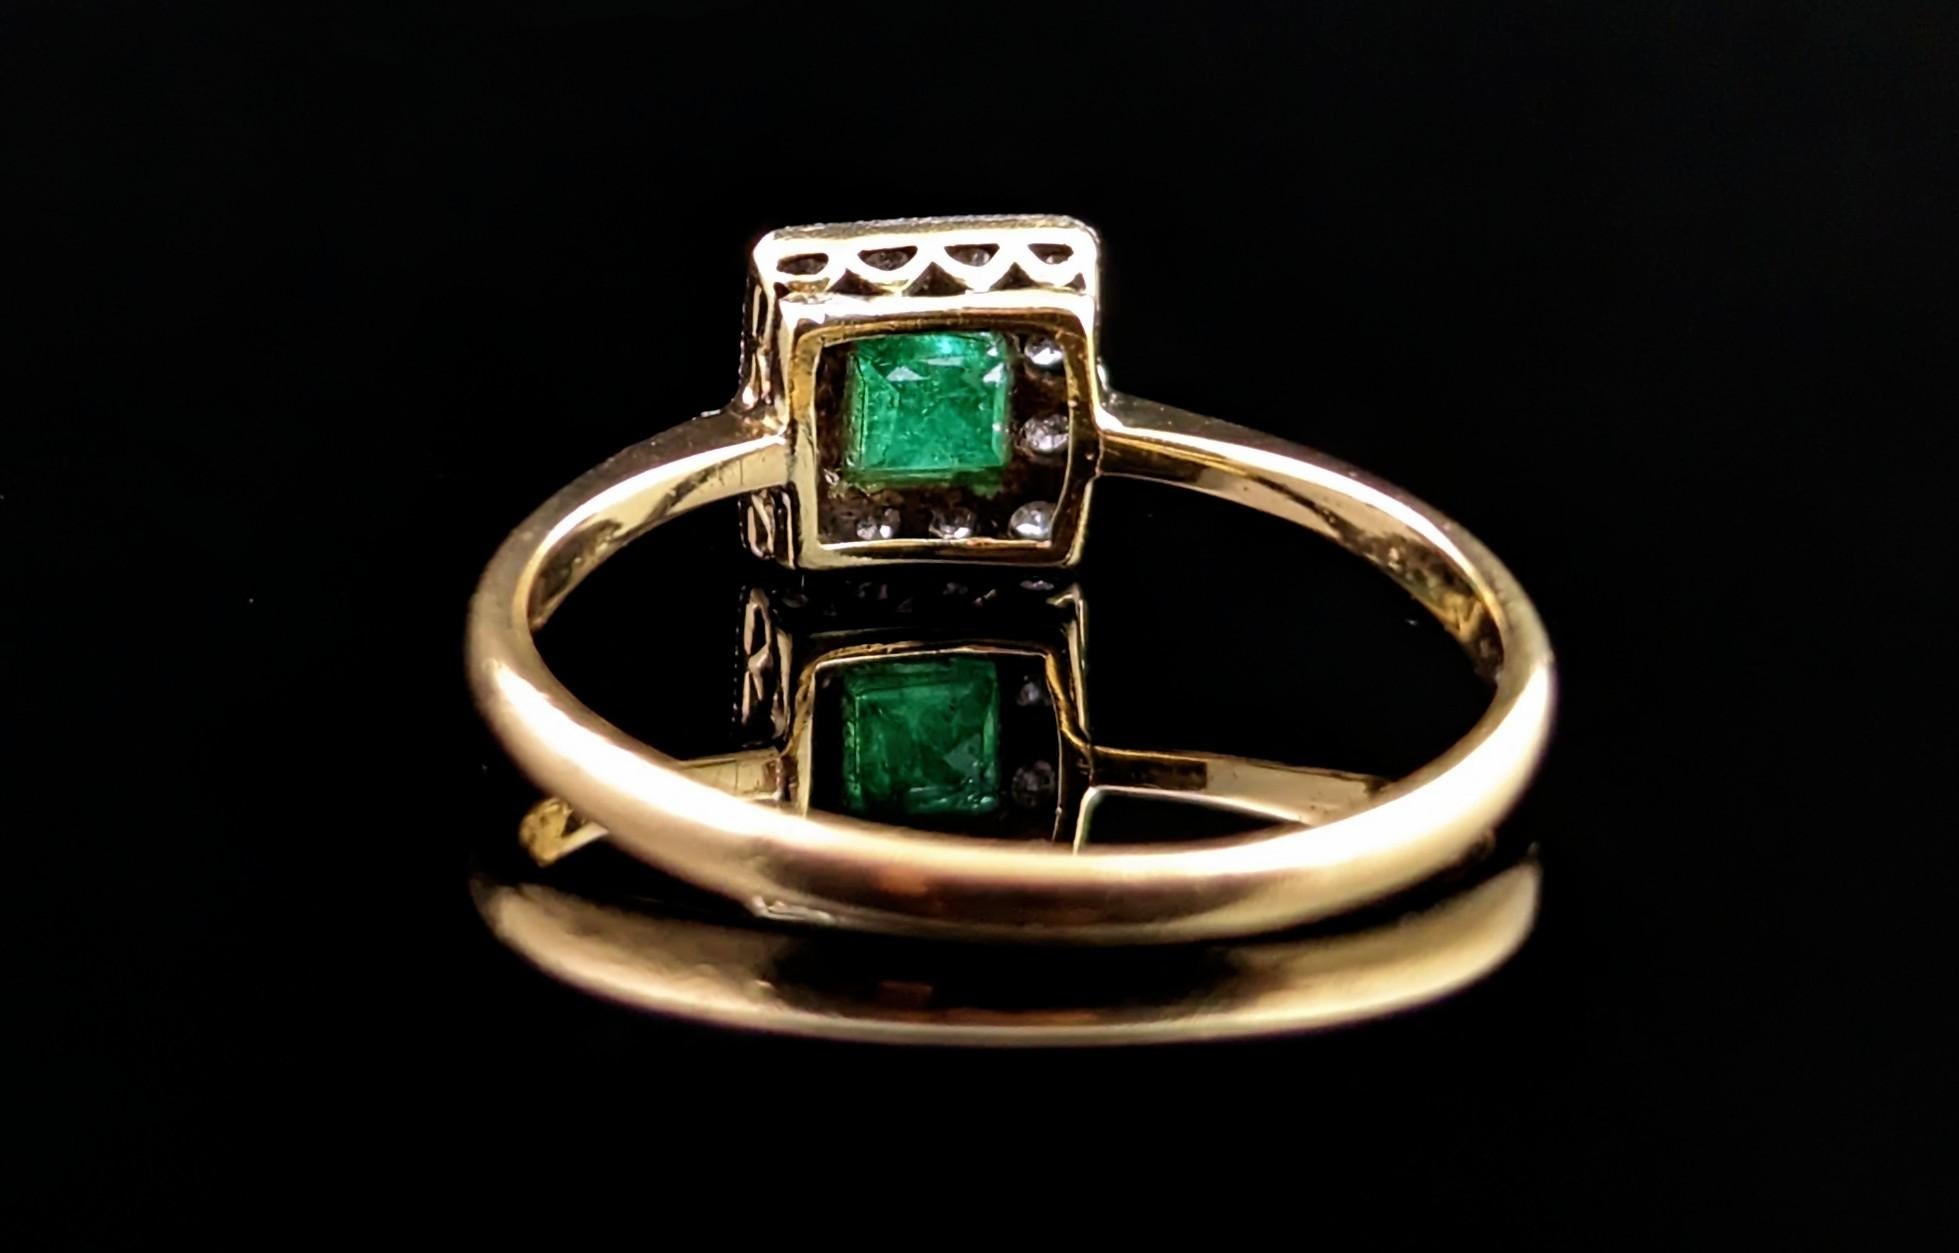 Women's Vintage Art Deco Emerald and Diamond Ring, 18k Gold and Platinum